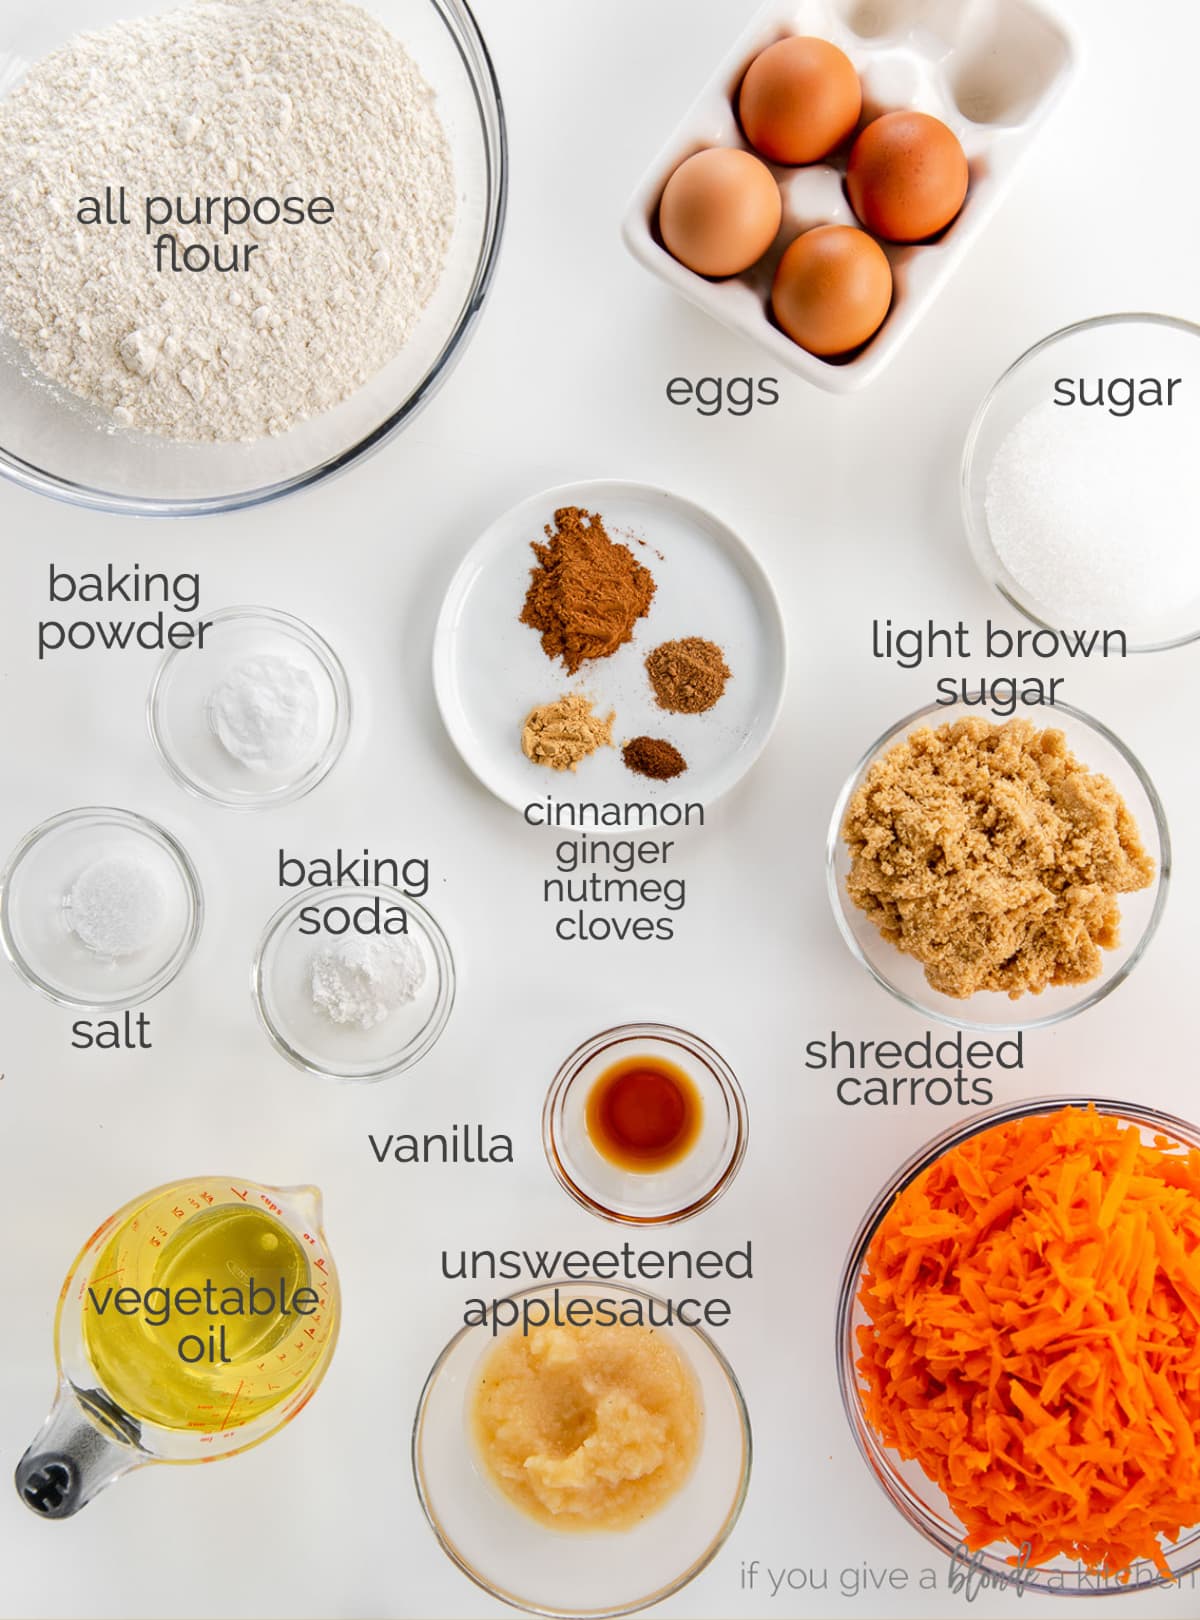 carrot cake ingredients in bowls labeled with text